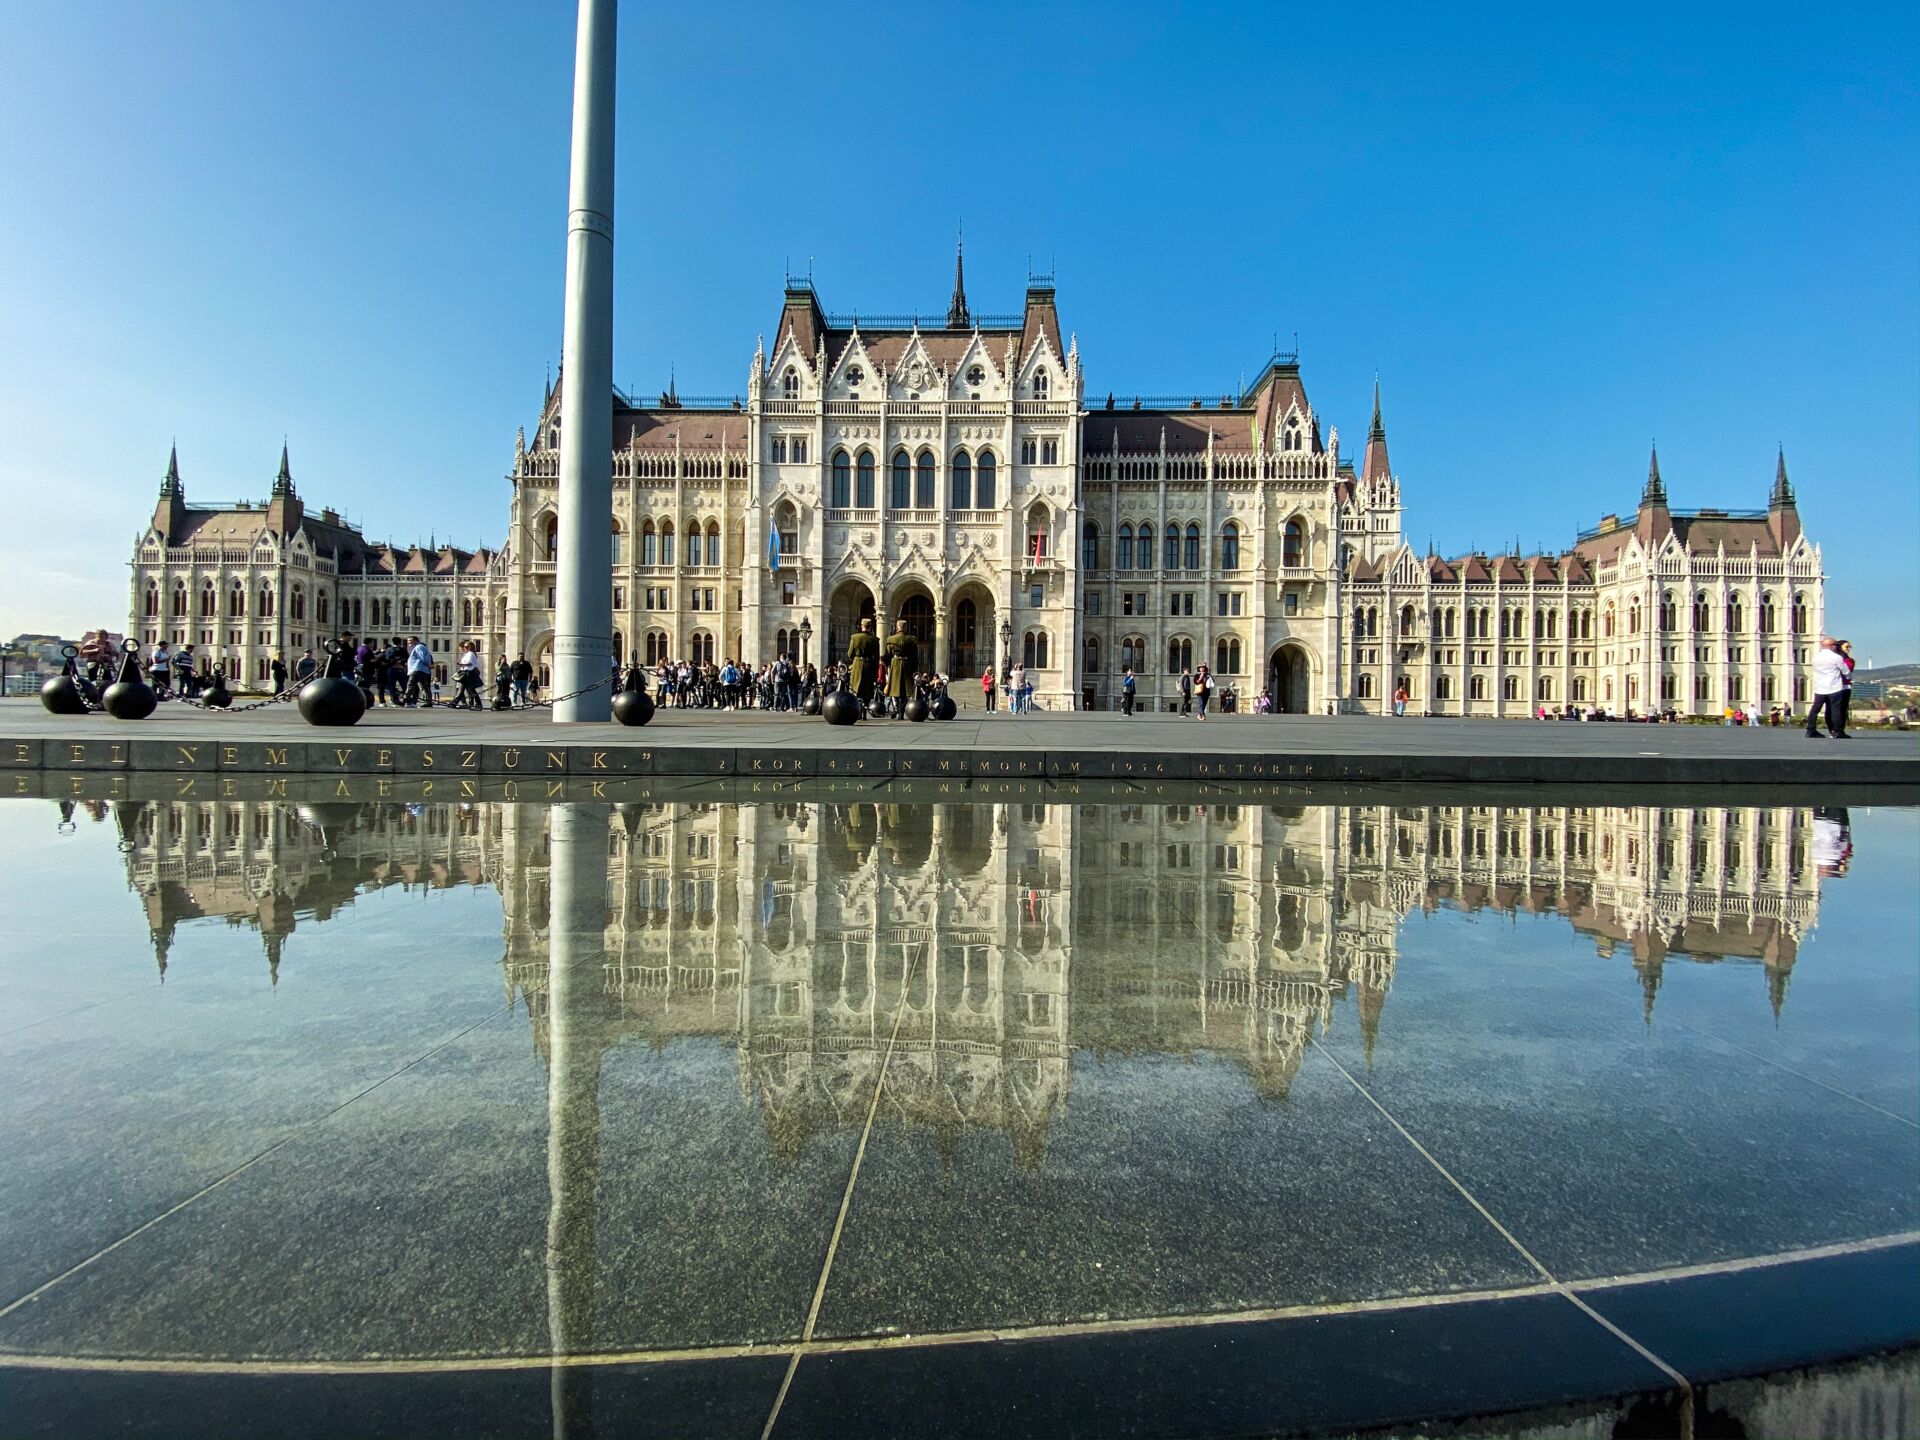  The Hungarian Parliament from Kossuth Lajos square